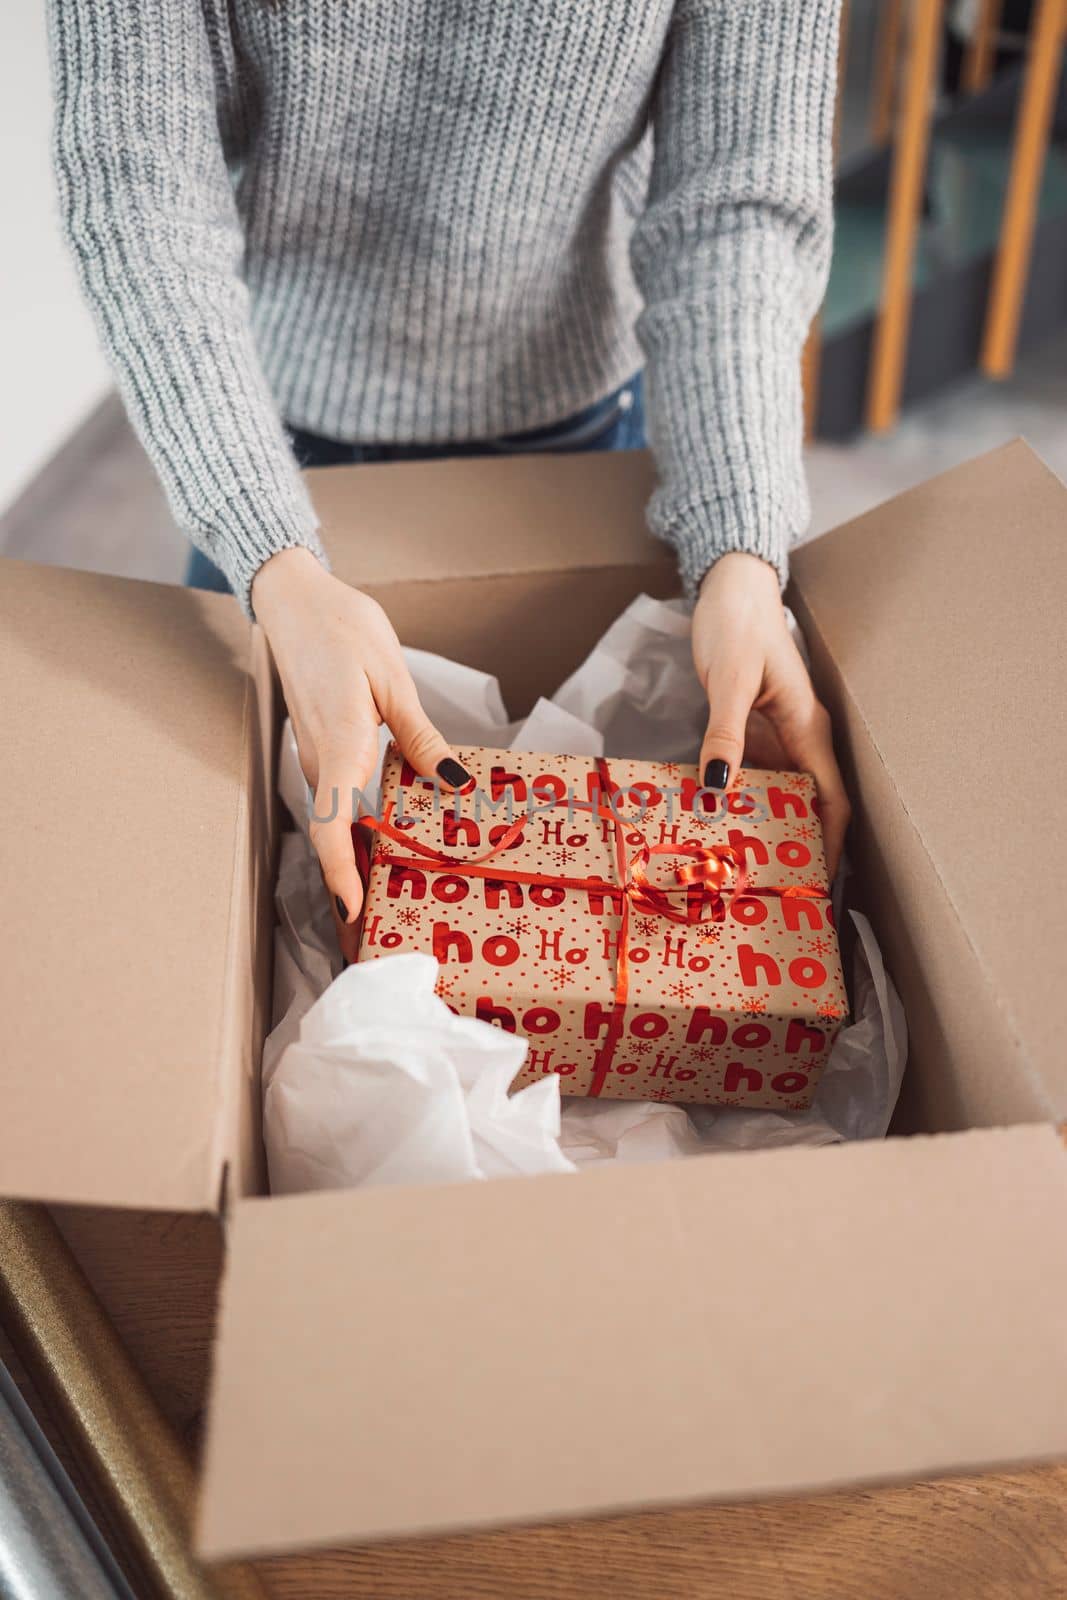 Young caucasian woman wrapping a gift, getting it ready to send in the post. Woman packaging a surprise gift for a family member, packaging it into a brown cardboard box.